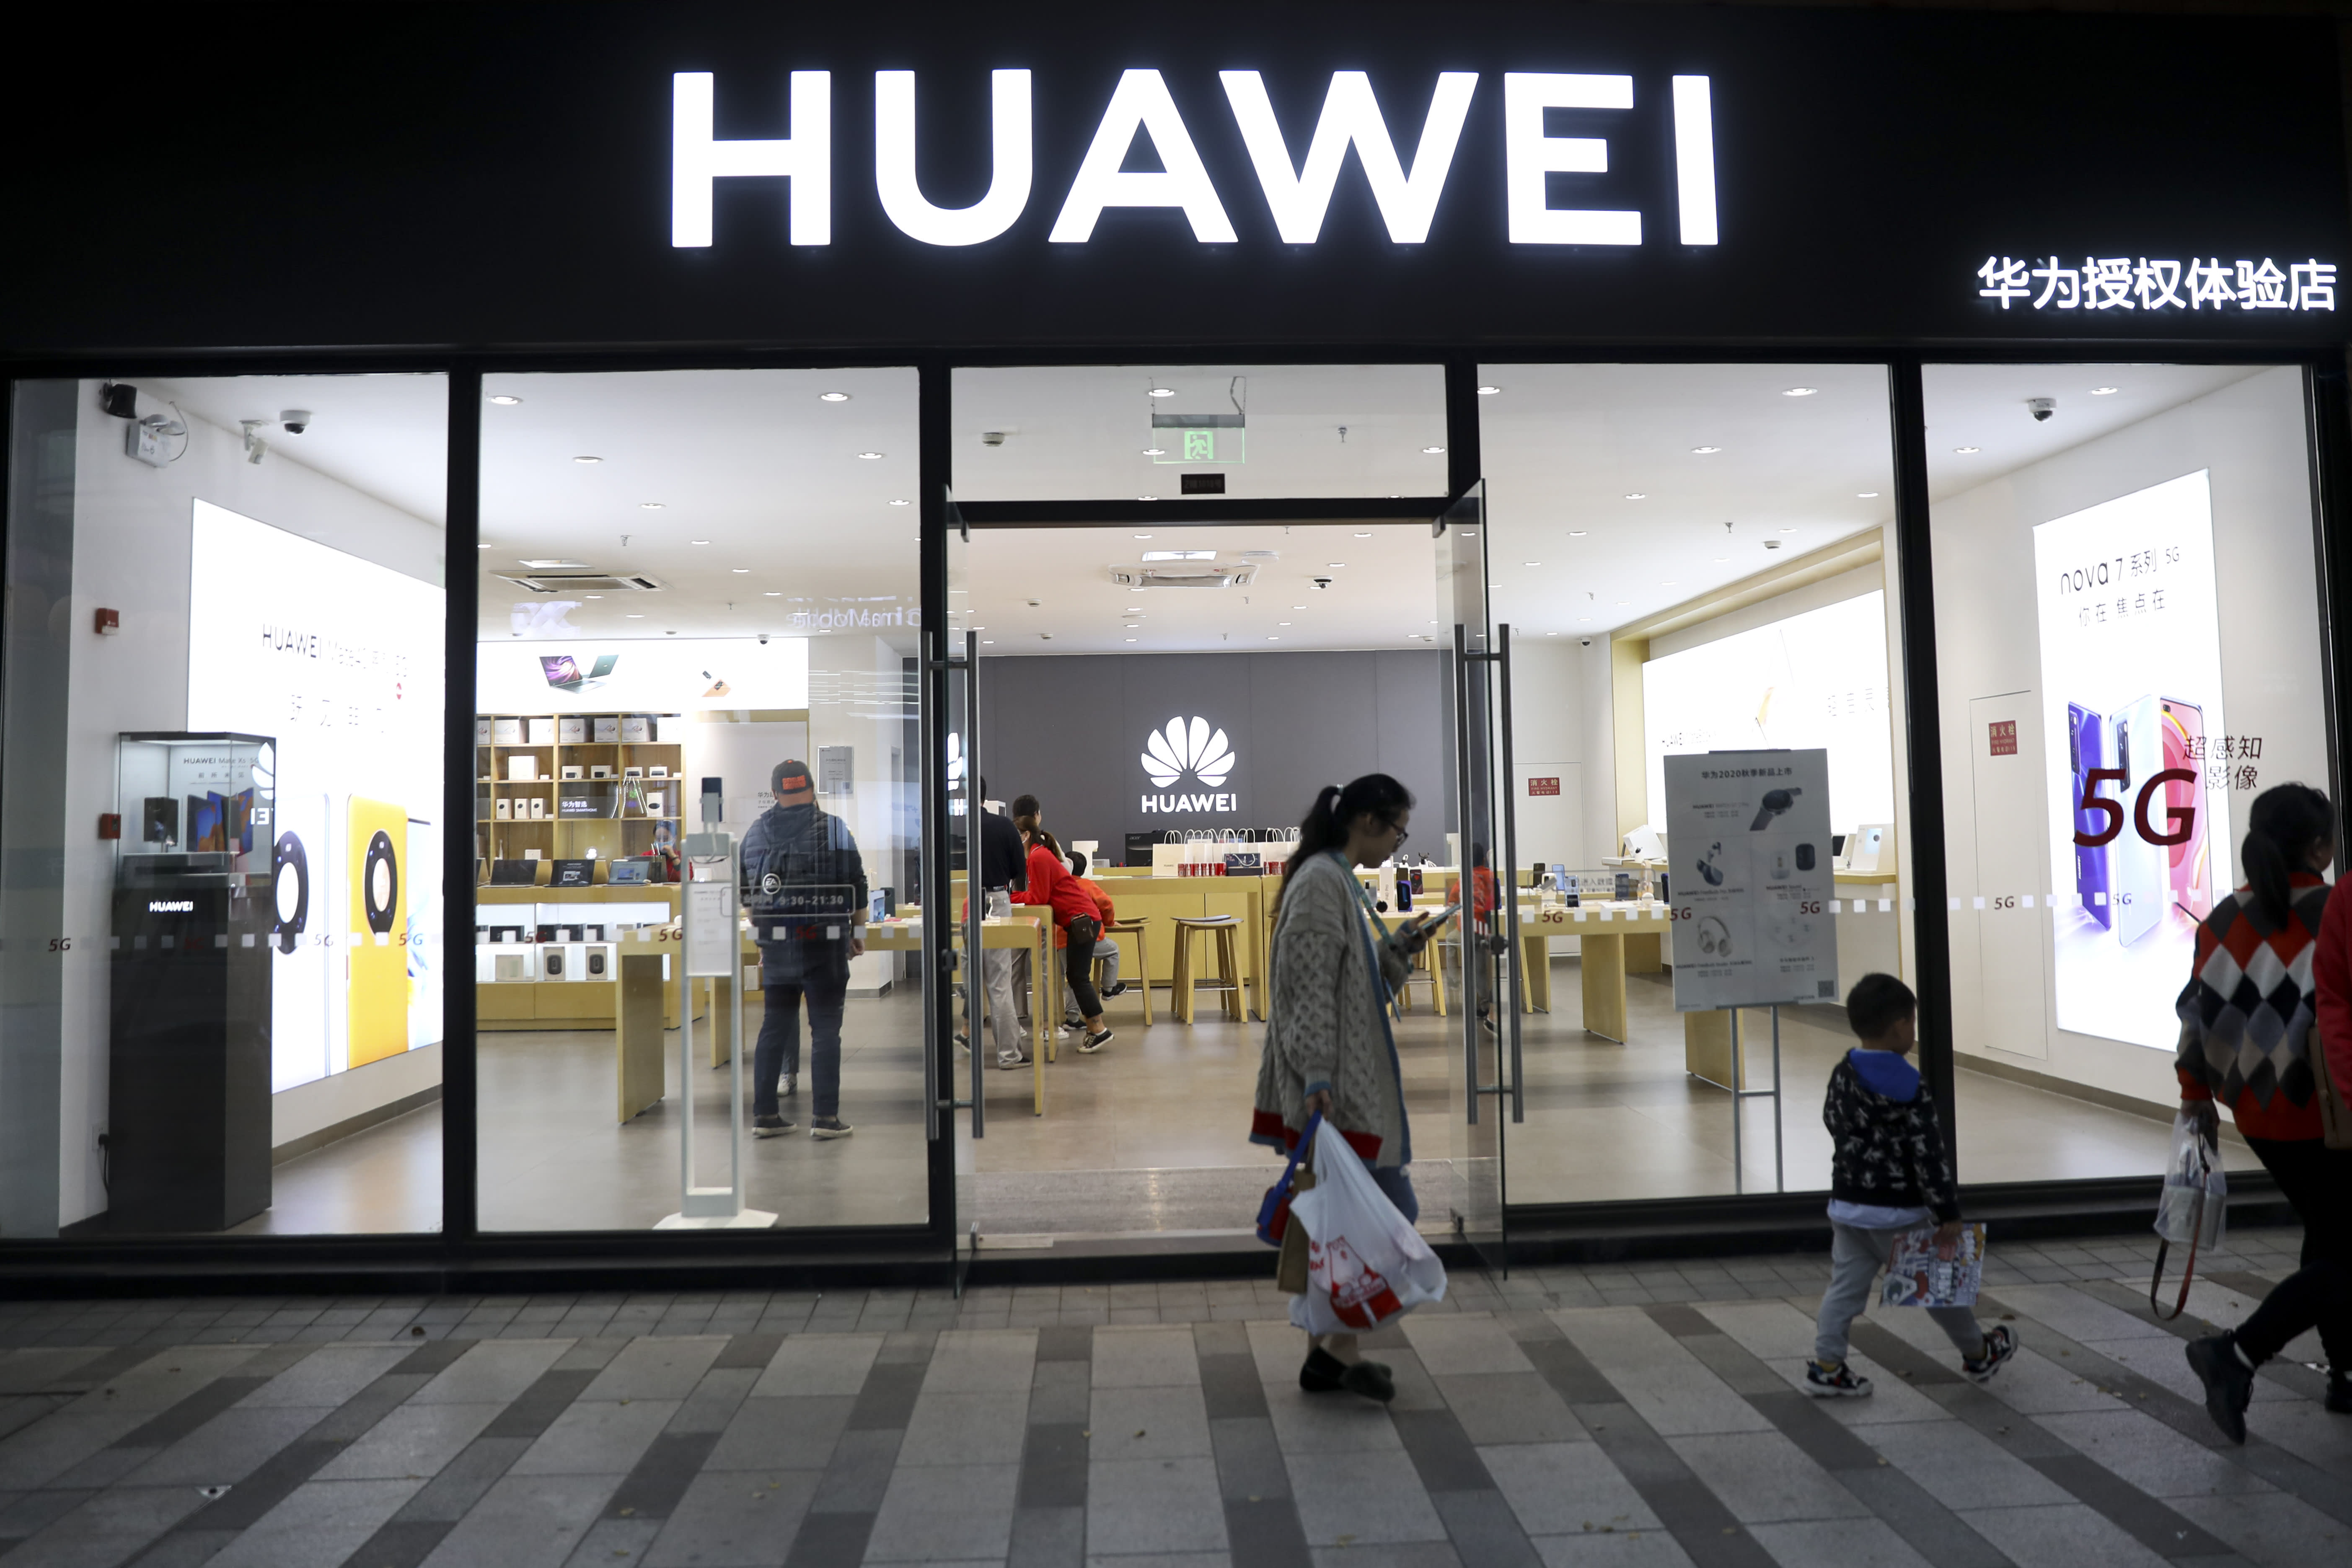 Huawei Q4 smartphone shipments are down 41% as US sanctions bite